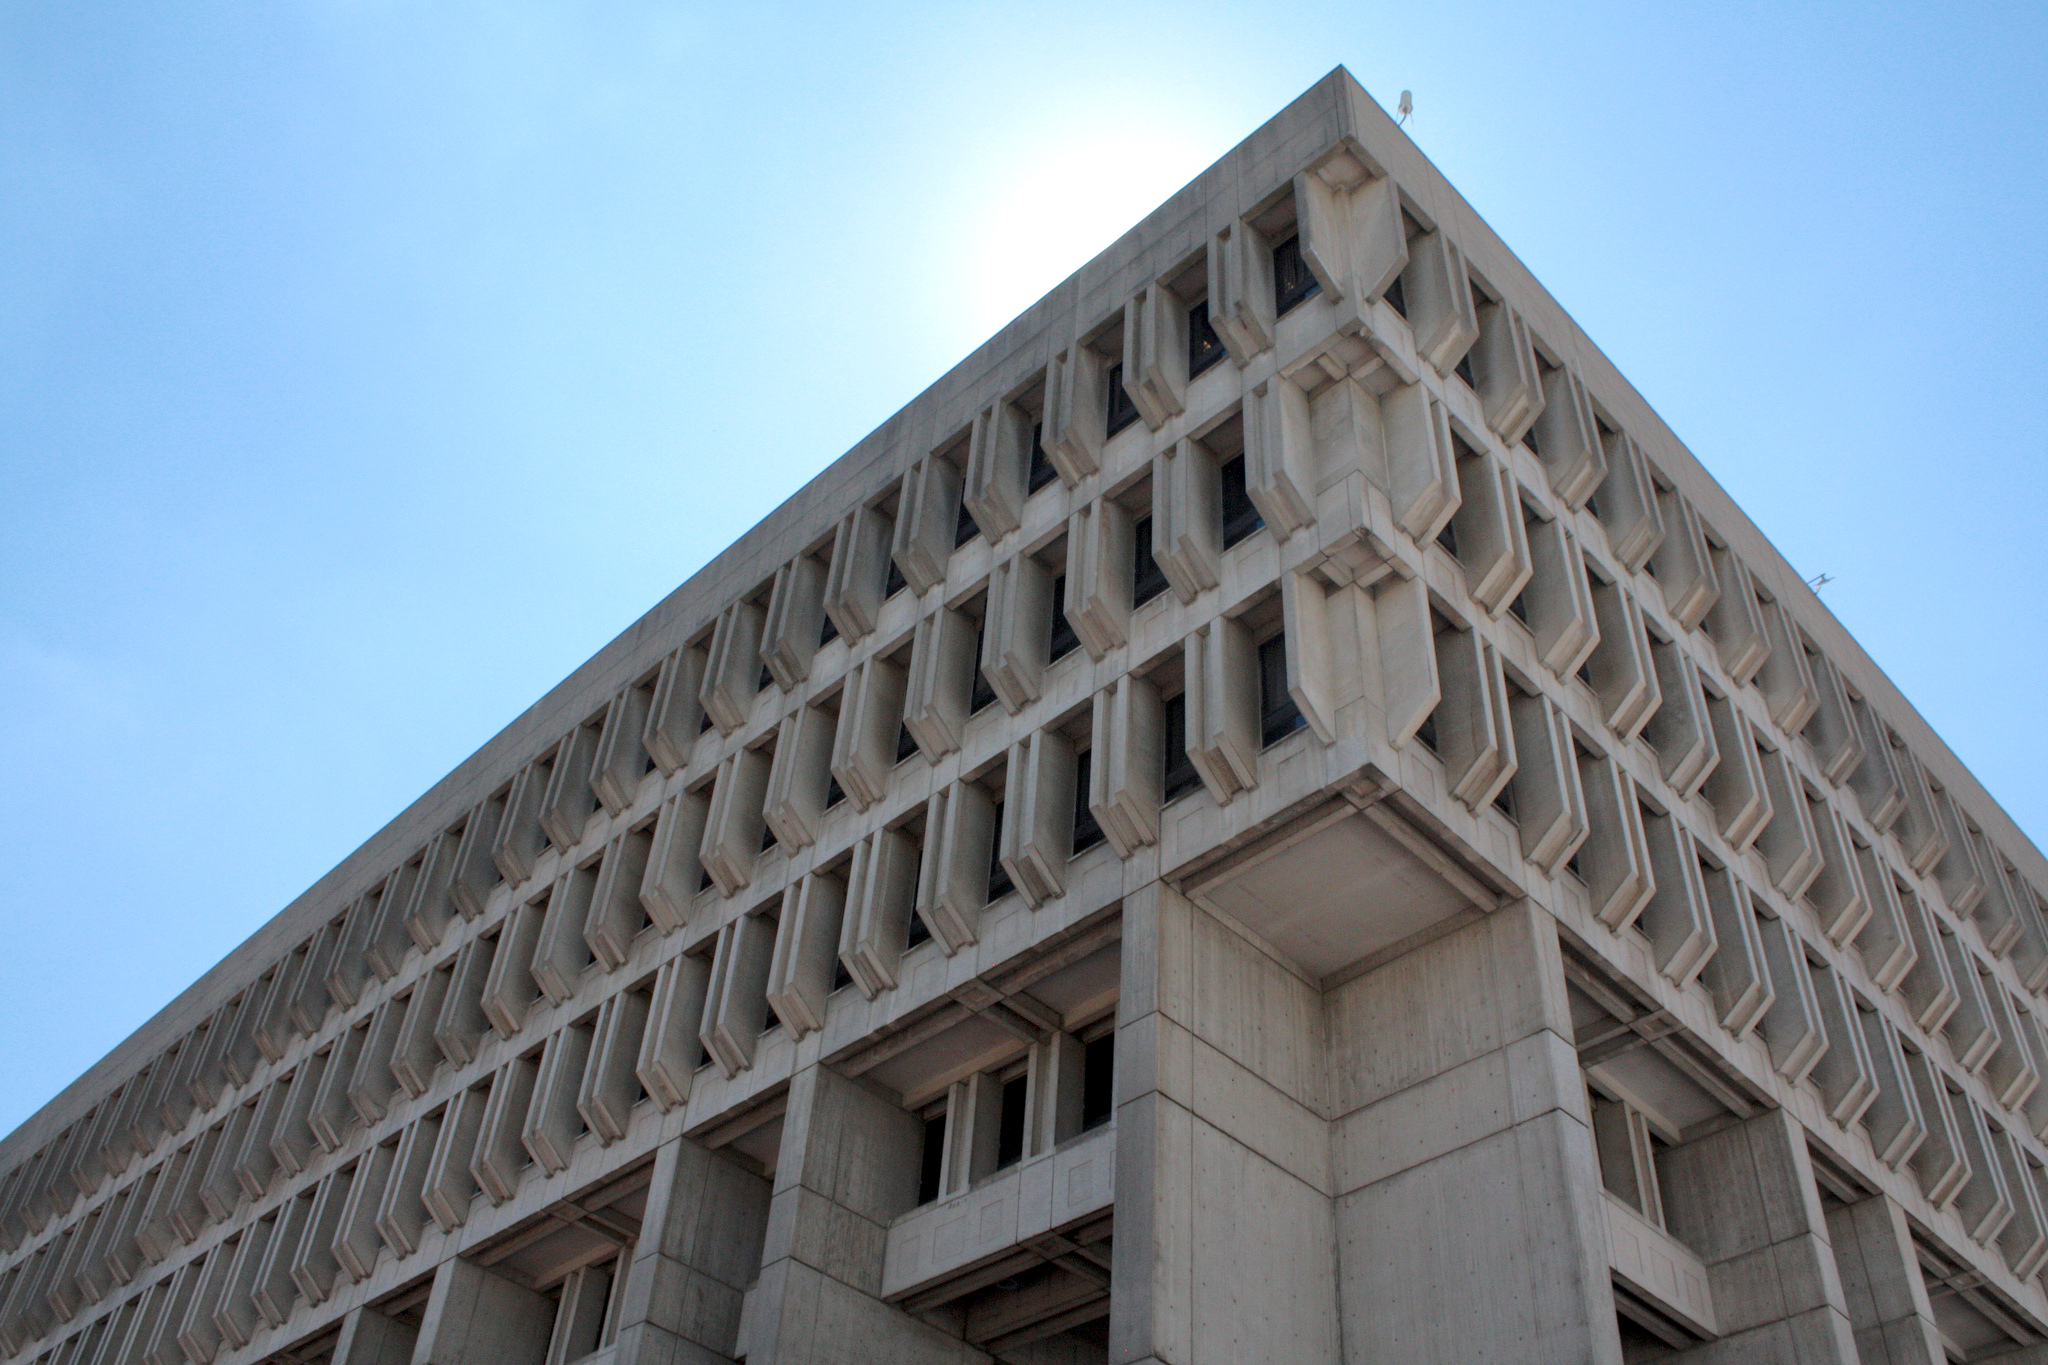 detail image of the underside of the overhang of the roof on Boston City Hall